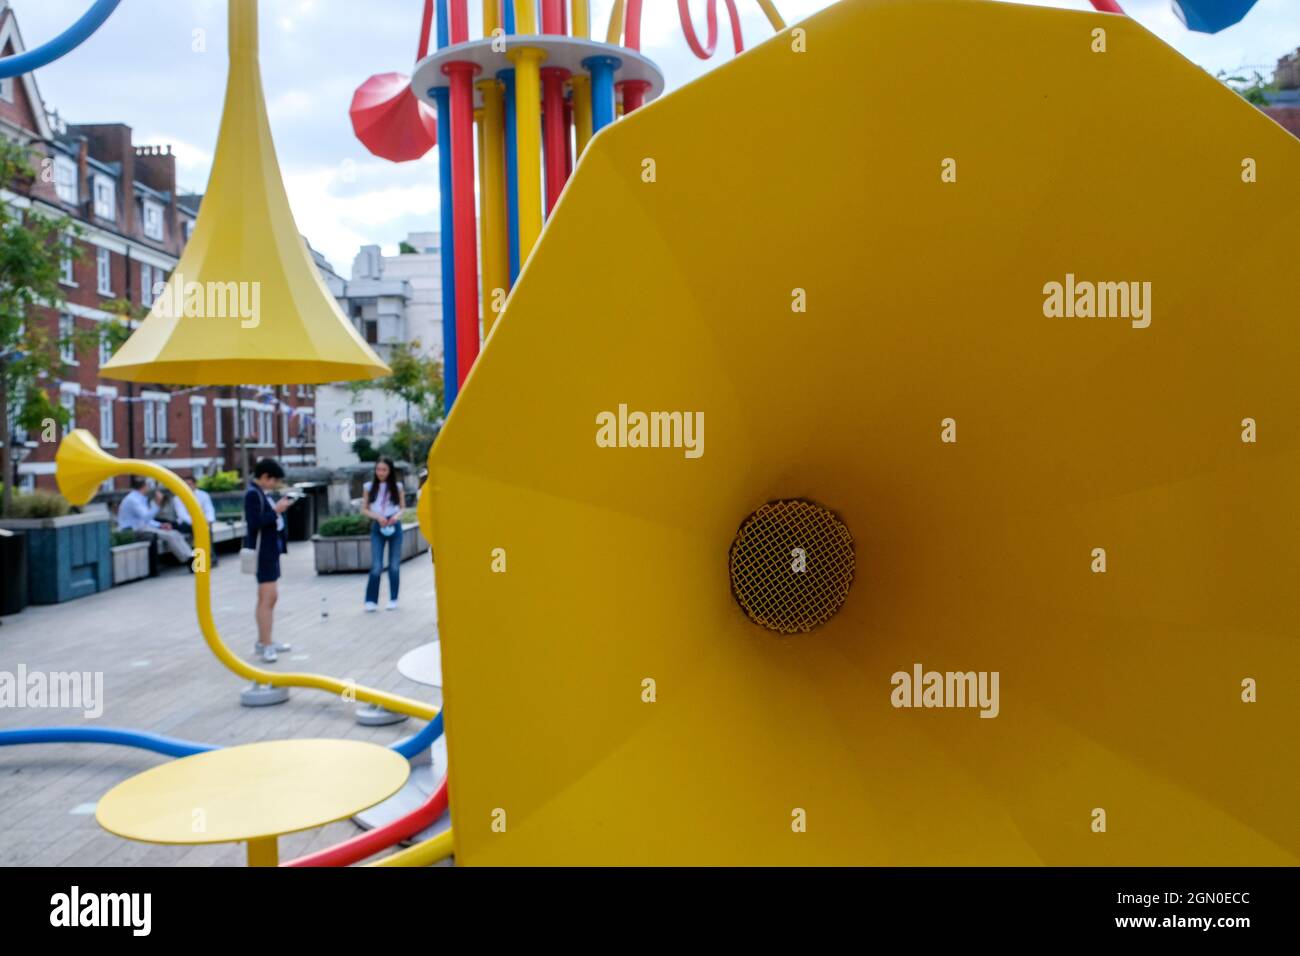 Brown Hart Gardens, Mayfair, London, UK. 21st Sept 2021. London Design Festival. Sonic Bloom curated by Alter-Projects, designed by sound artist and designer, Yuri Suzuki, in Brown Hart Gardens, Mayfair. Credit: Matthew Chattle/Alamy Live News Stock Photo